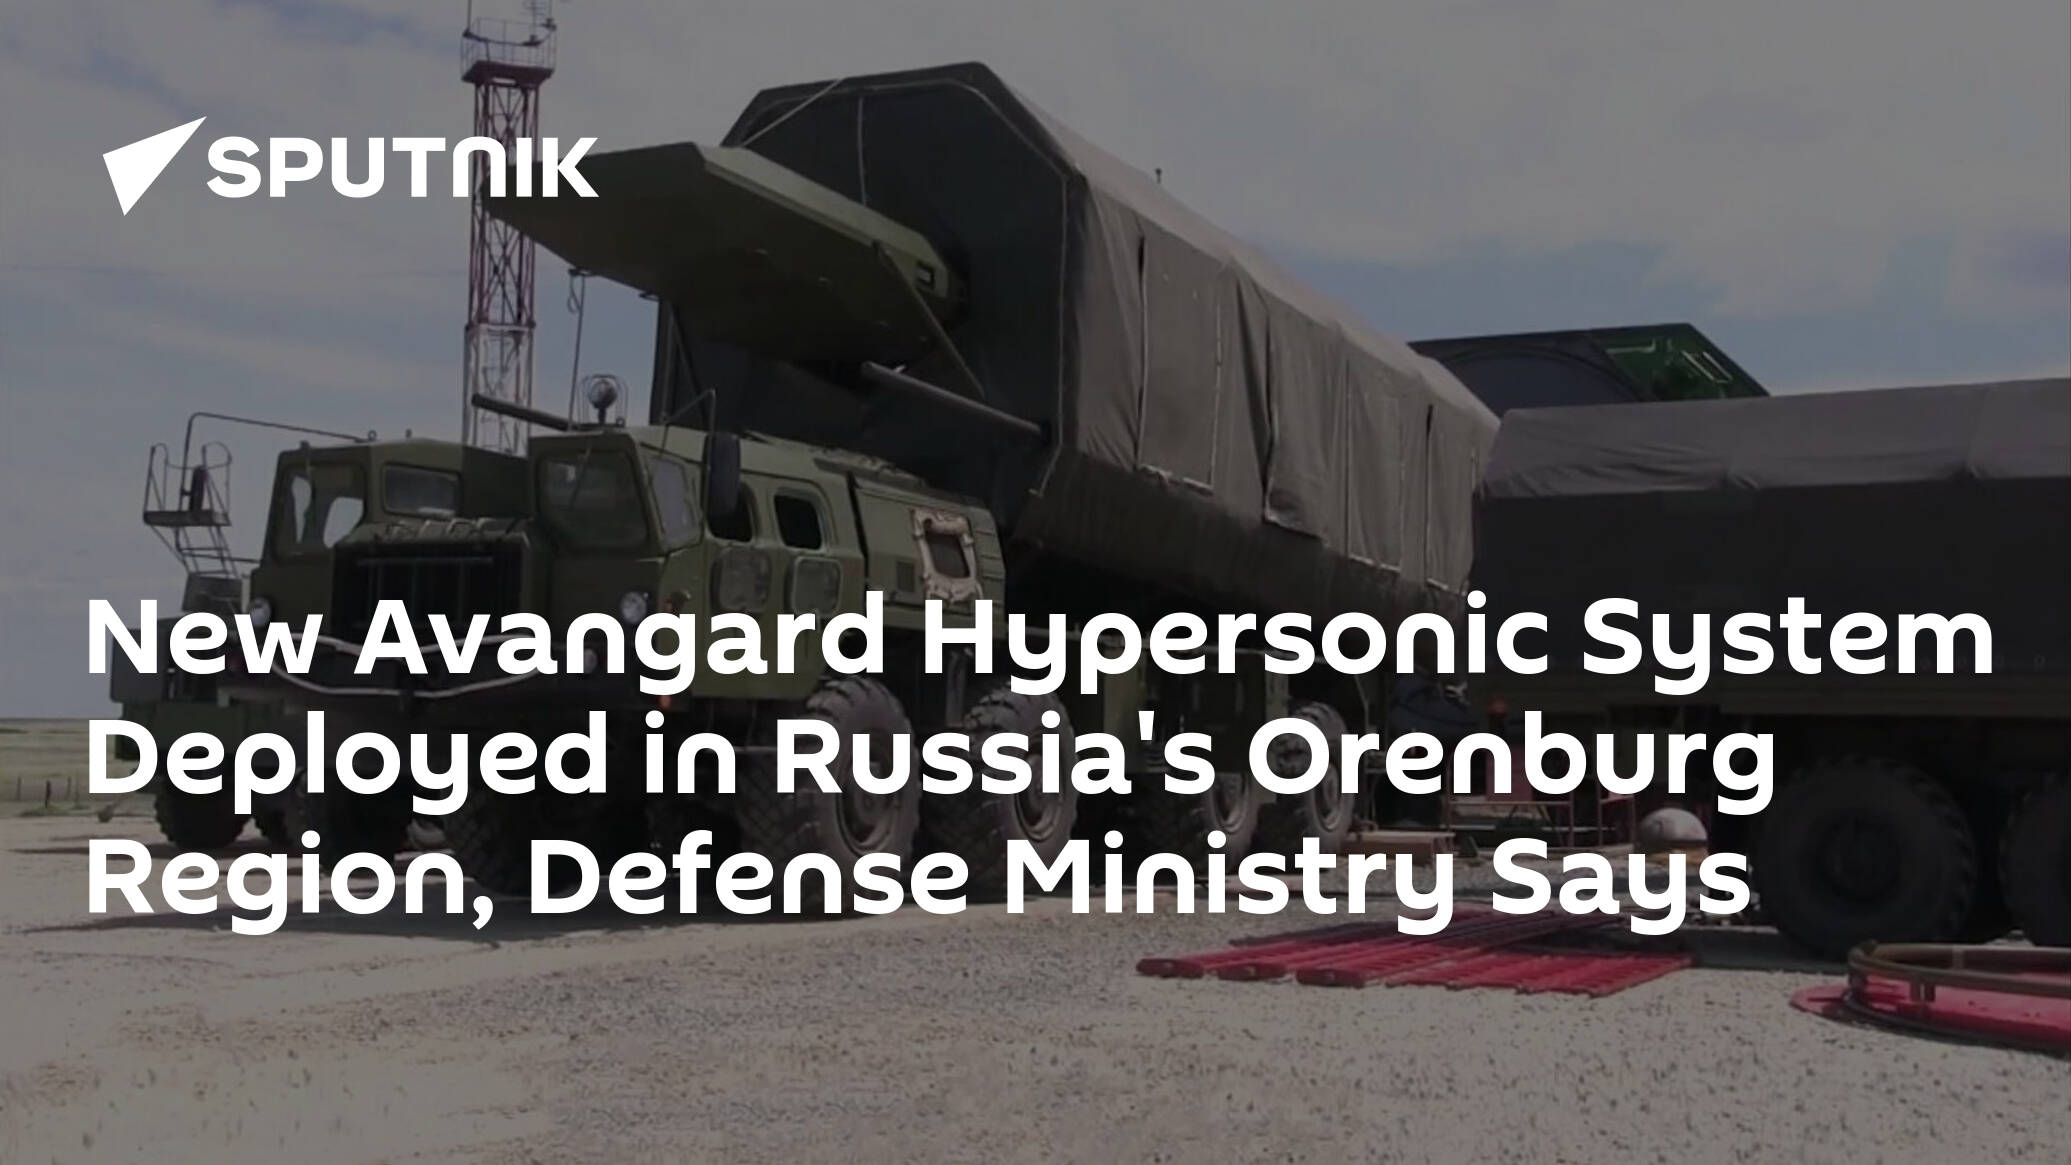 New Avangard Hypersonic System Deployed in Russia's Orenburg Region, Defense Ministry Says